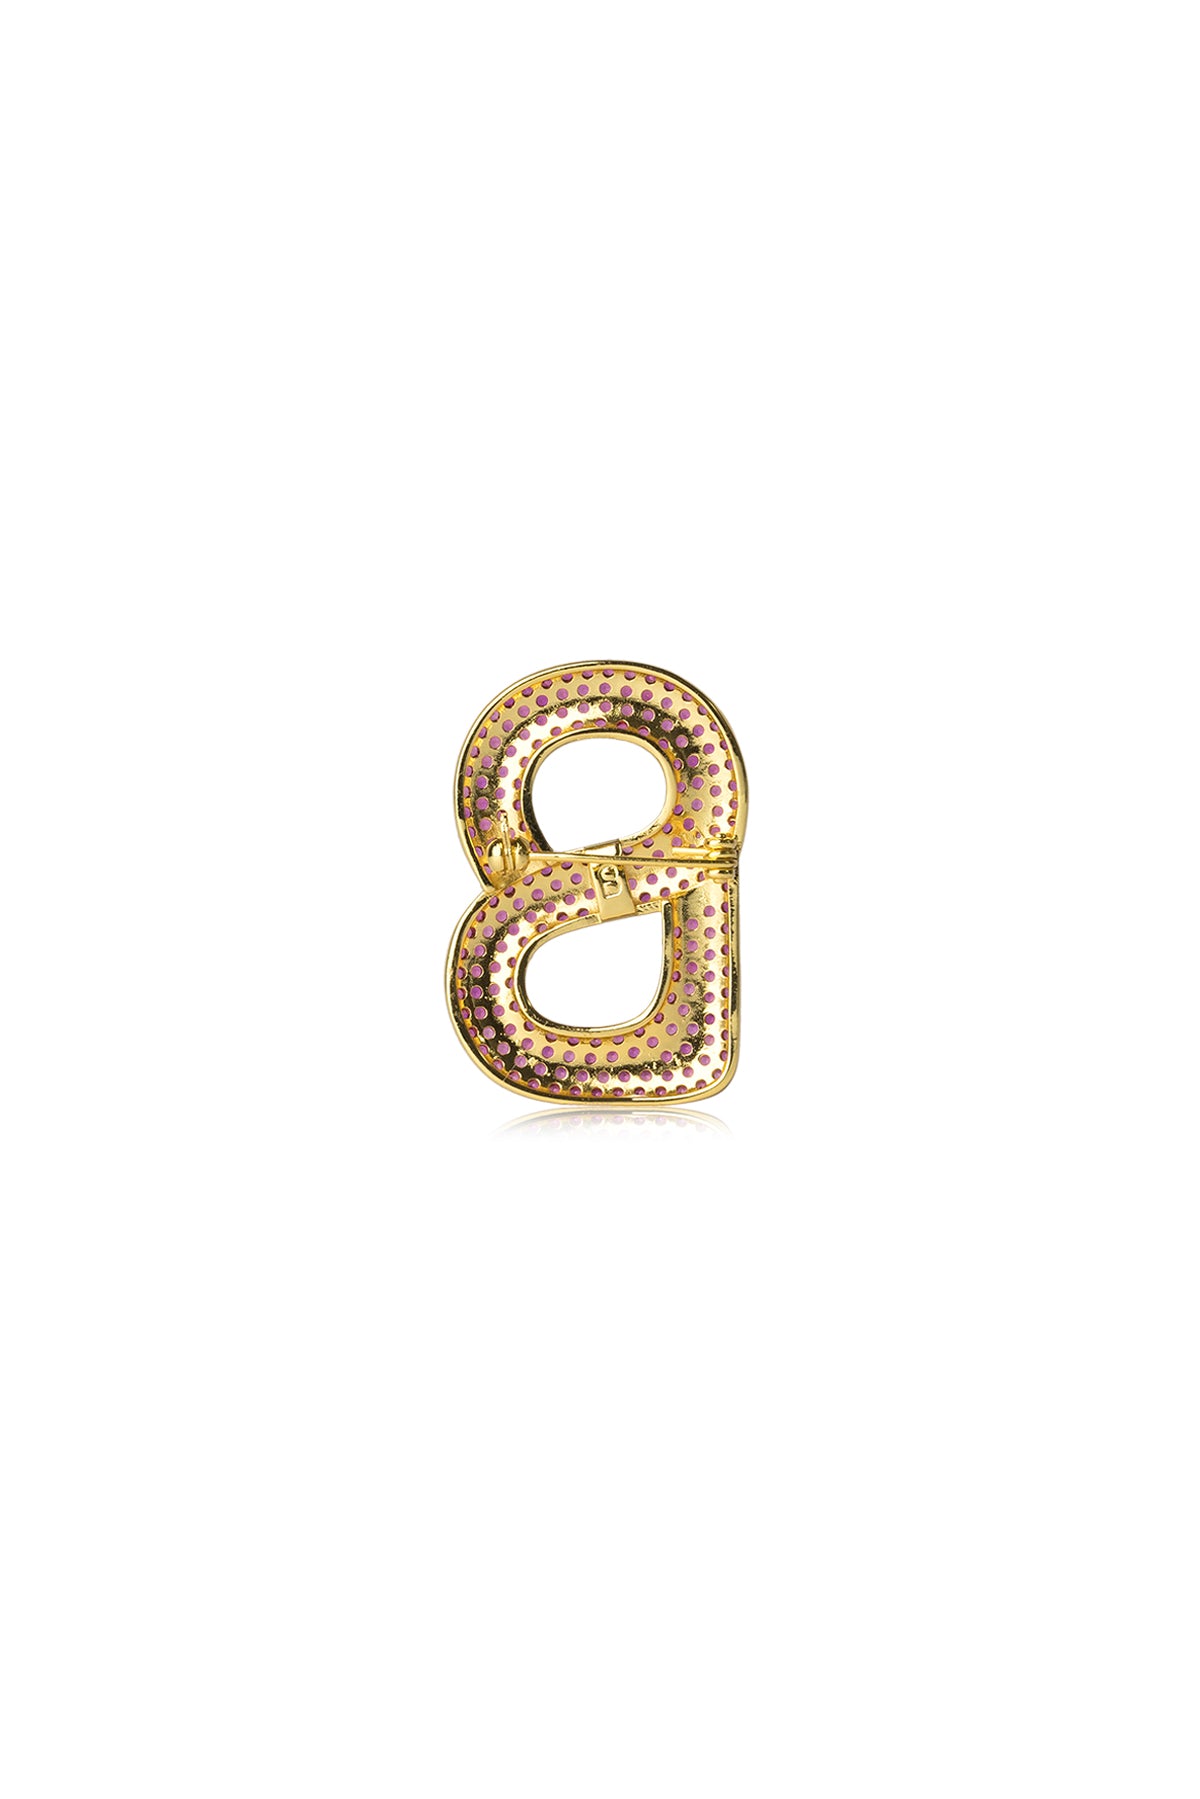 LUXE SIGNATURE BROOCH - RUBY